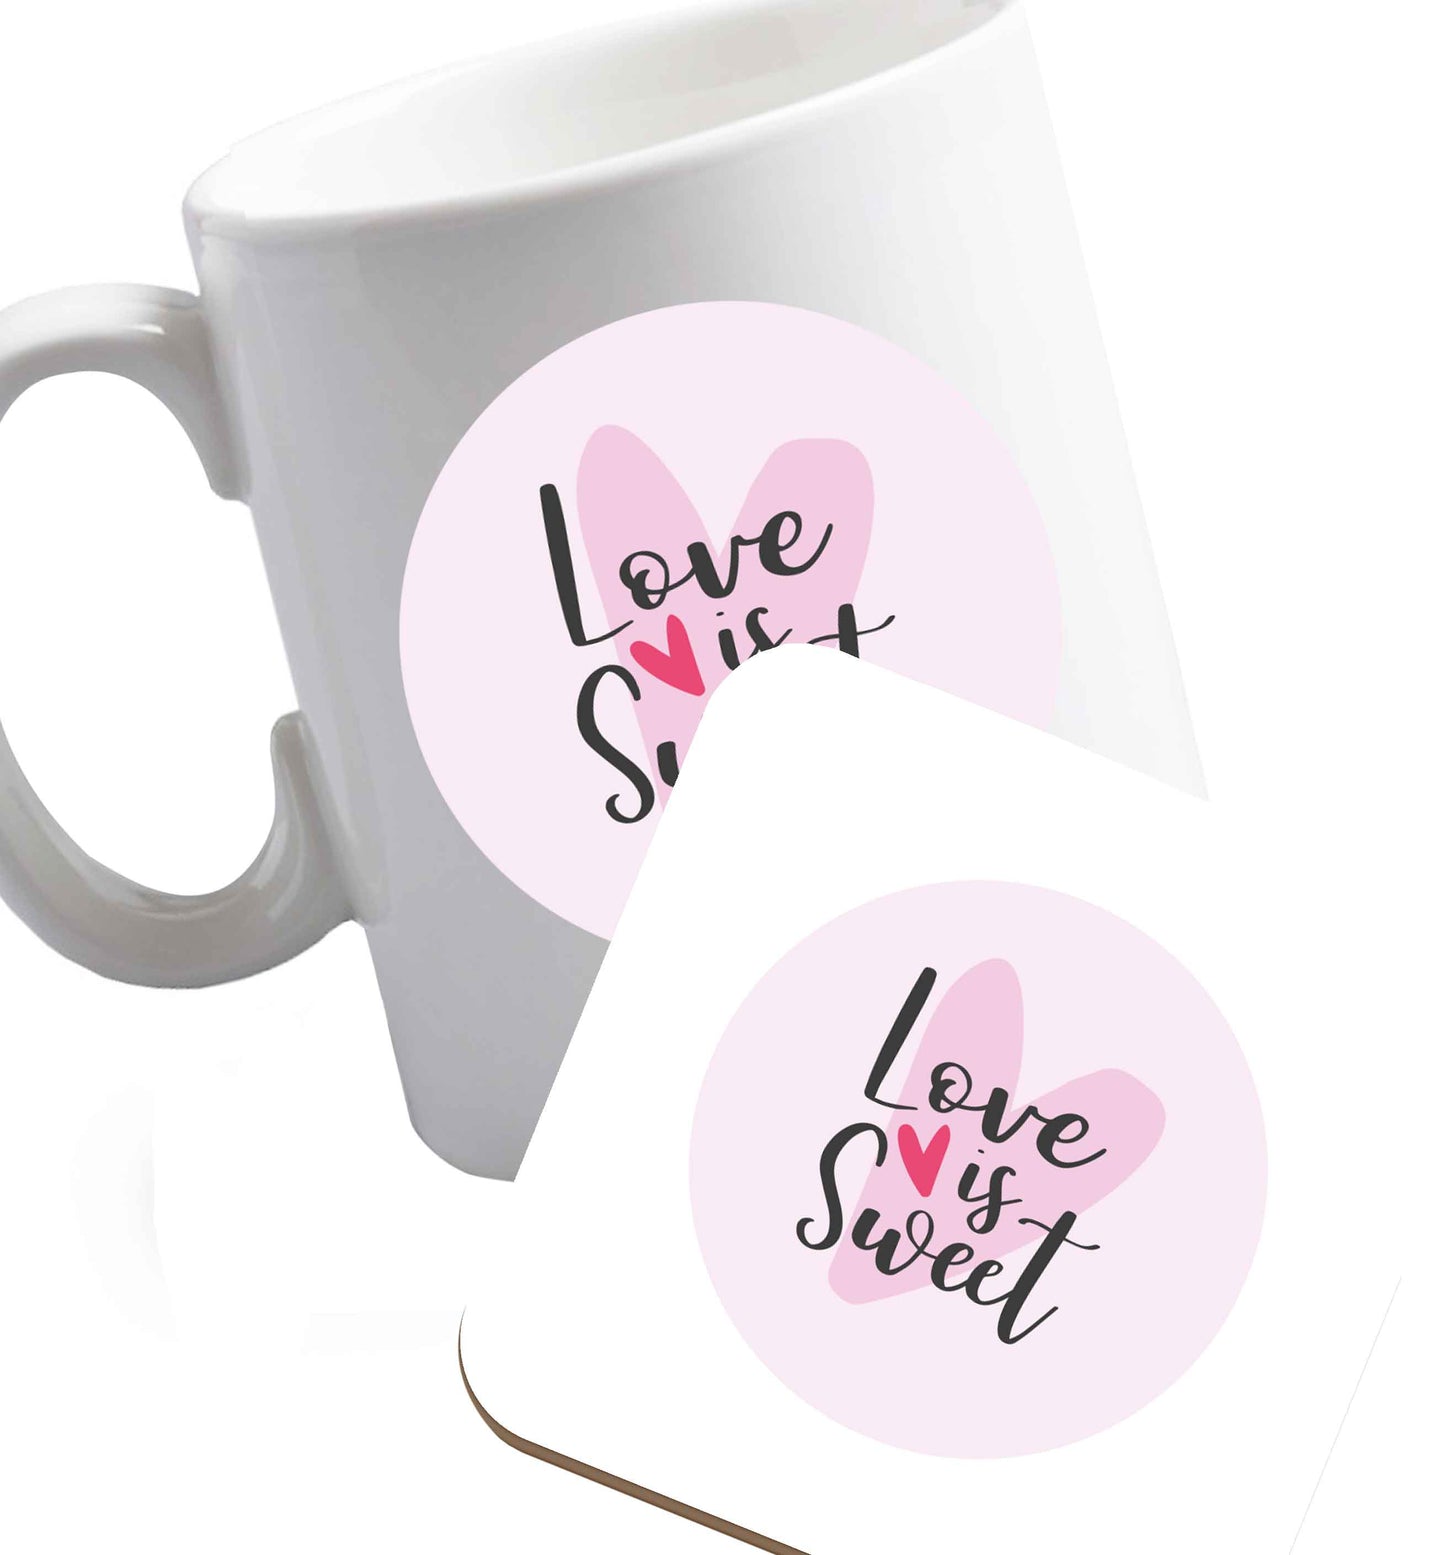 10 oz Love really does make the world go round! Ideal for weddings, valentines or just simply to show someone you love them!    ceramic mug and coaster set right handed